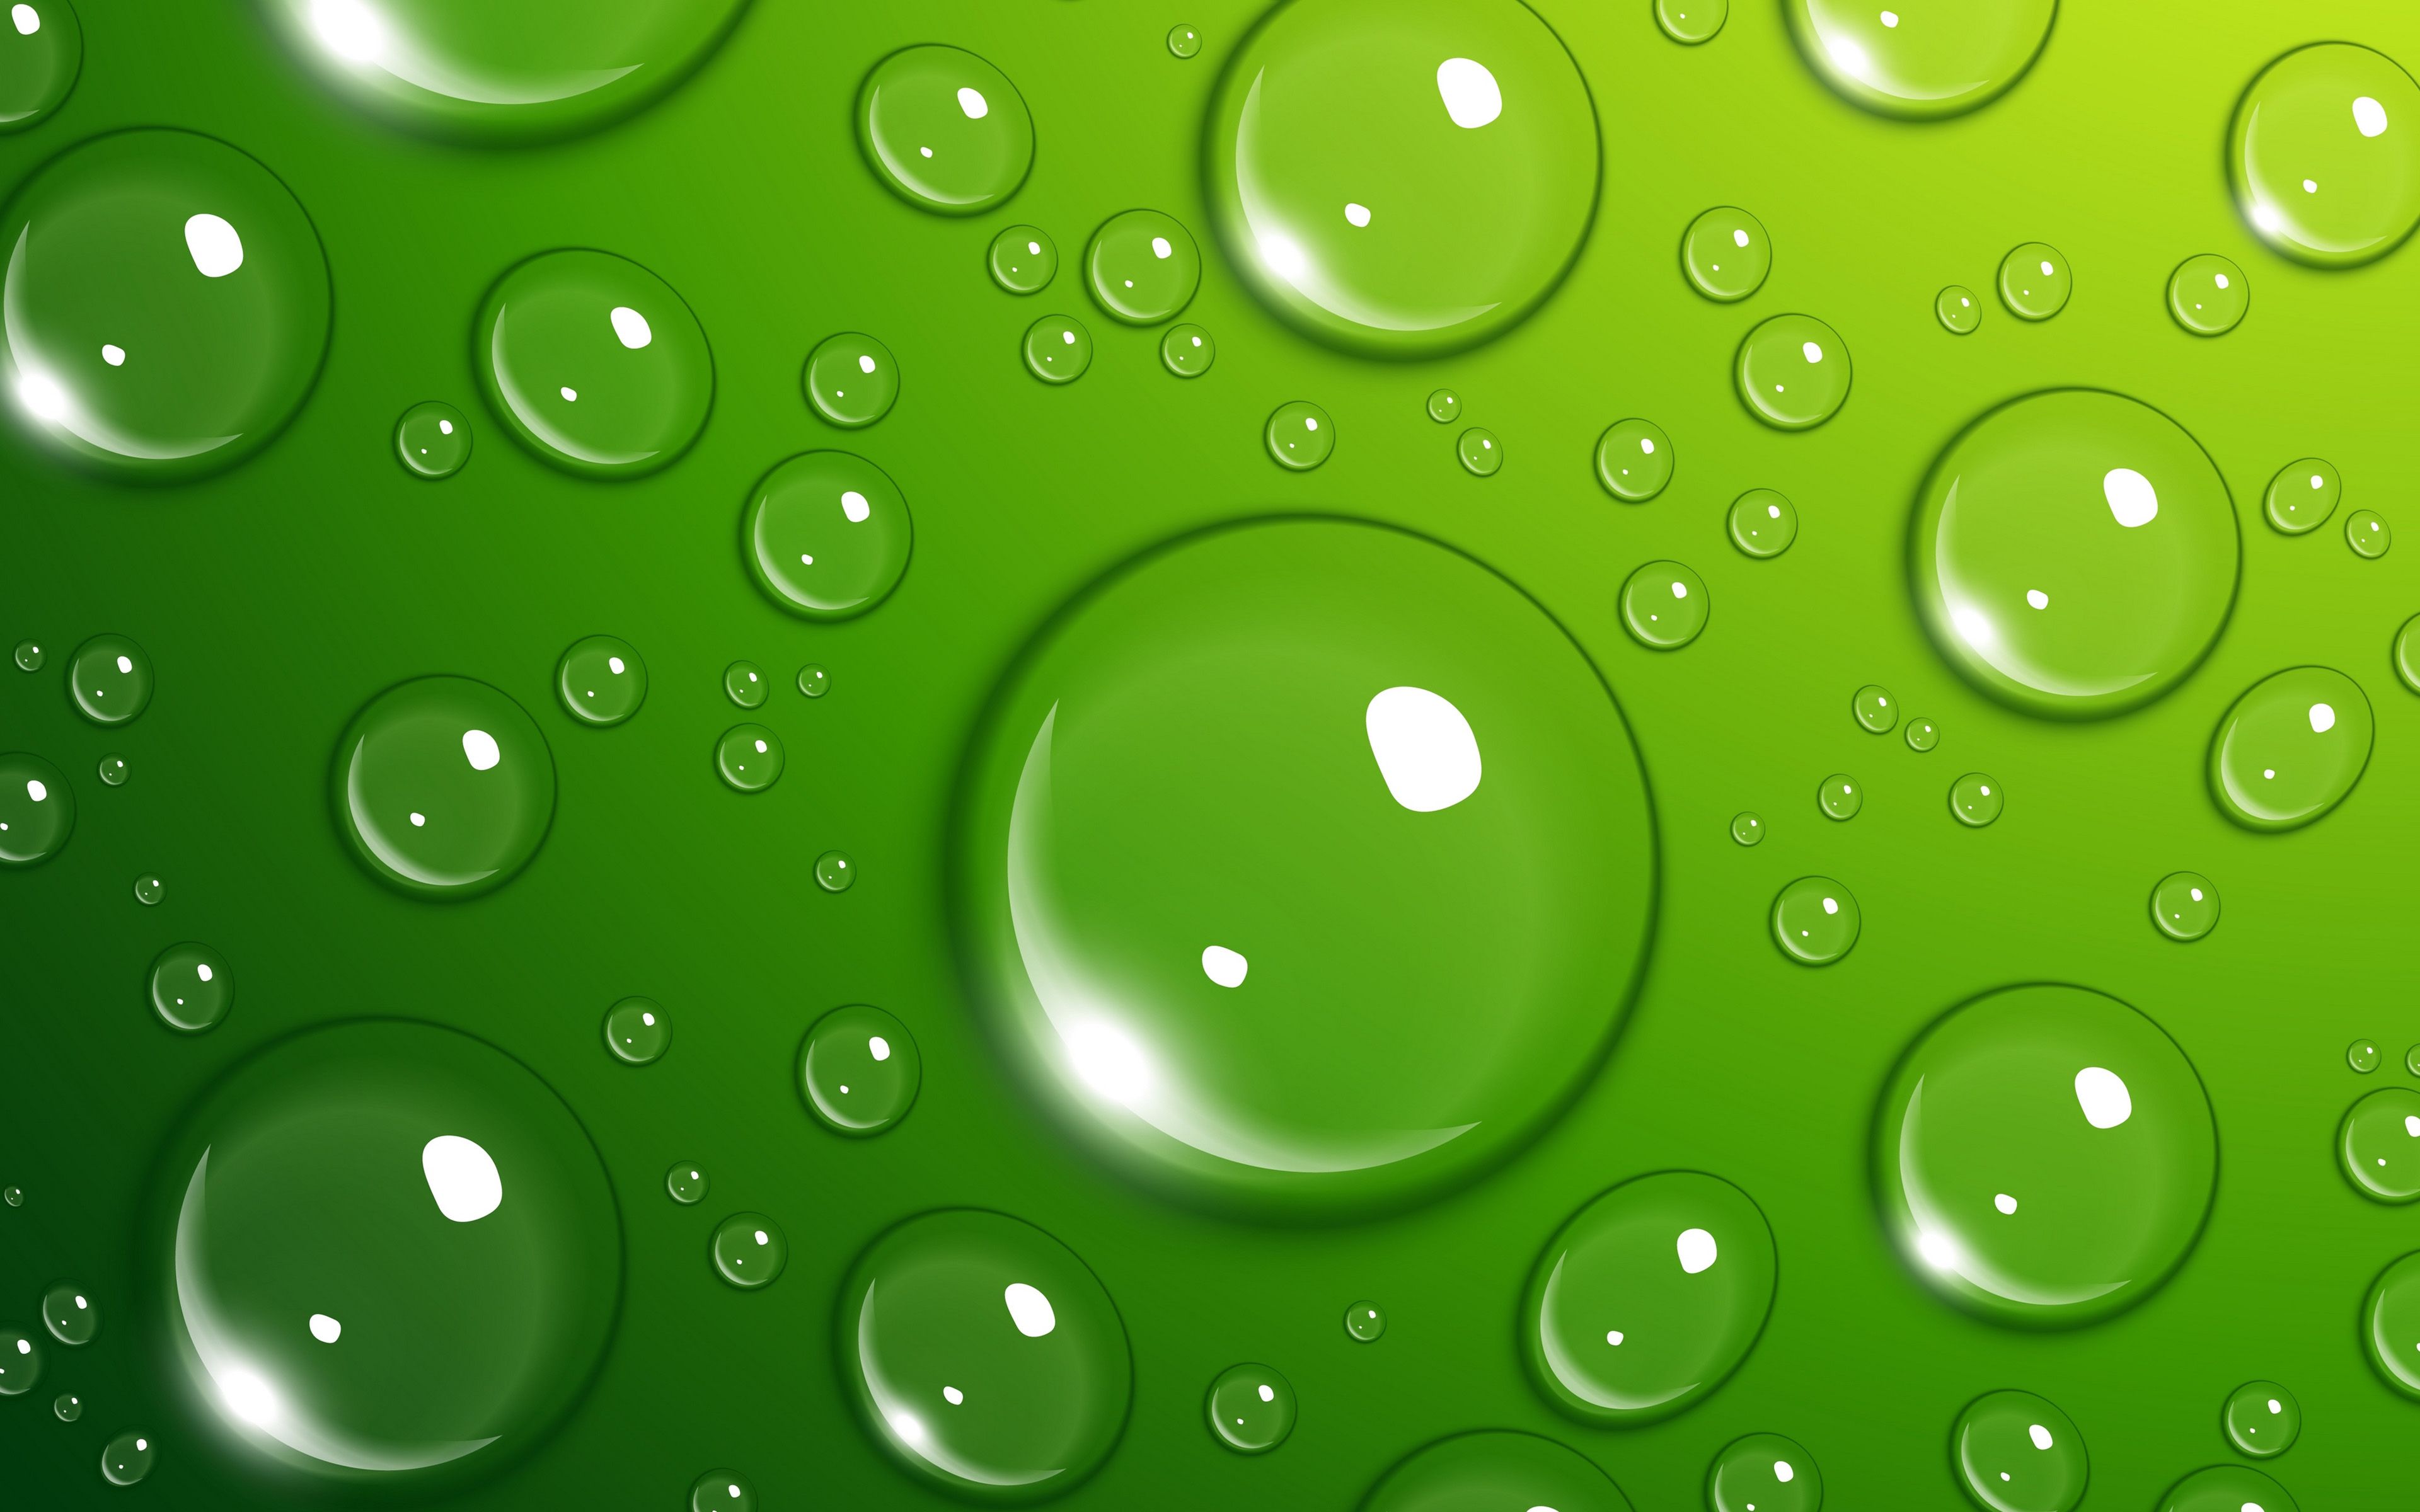 Download wallpaper 4k, water drops texture, water bubbles, green background, water drops, bubbles patterns, drops texture, water, drops on green background for desktop with resolution 3840x2400. High Quality HD picture wallpaper